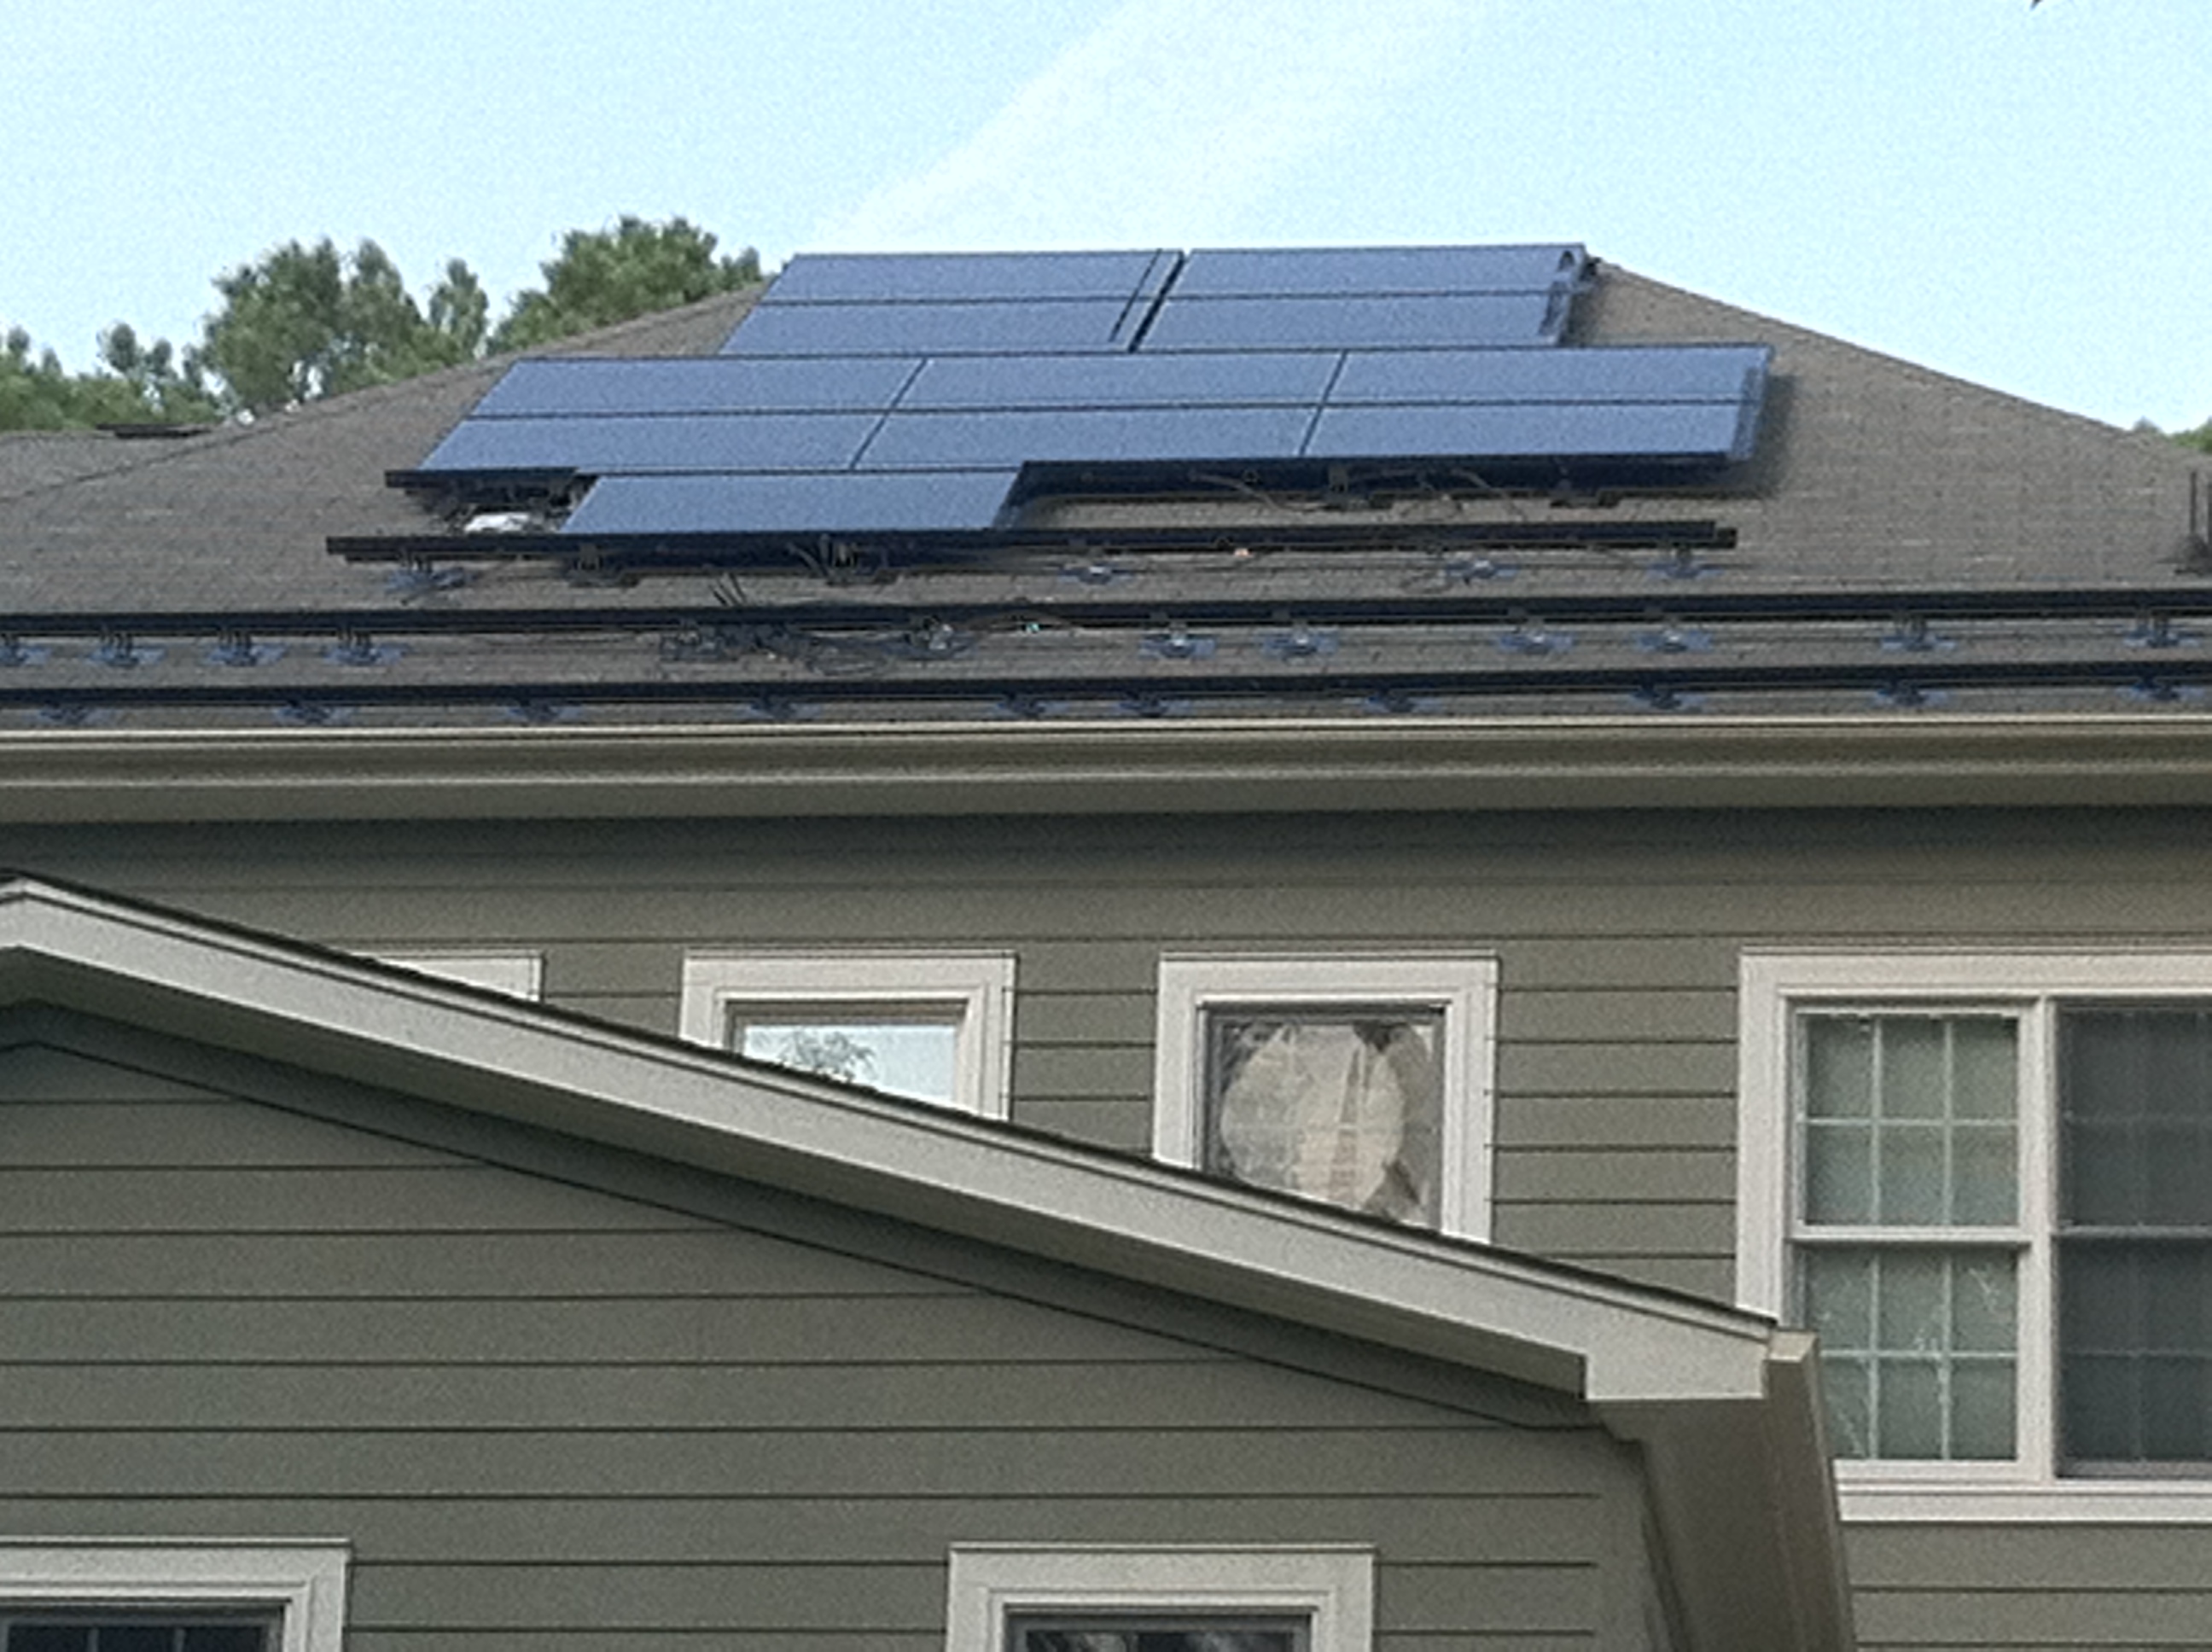 Solar panels being installed on our roof.